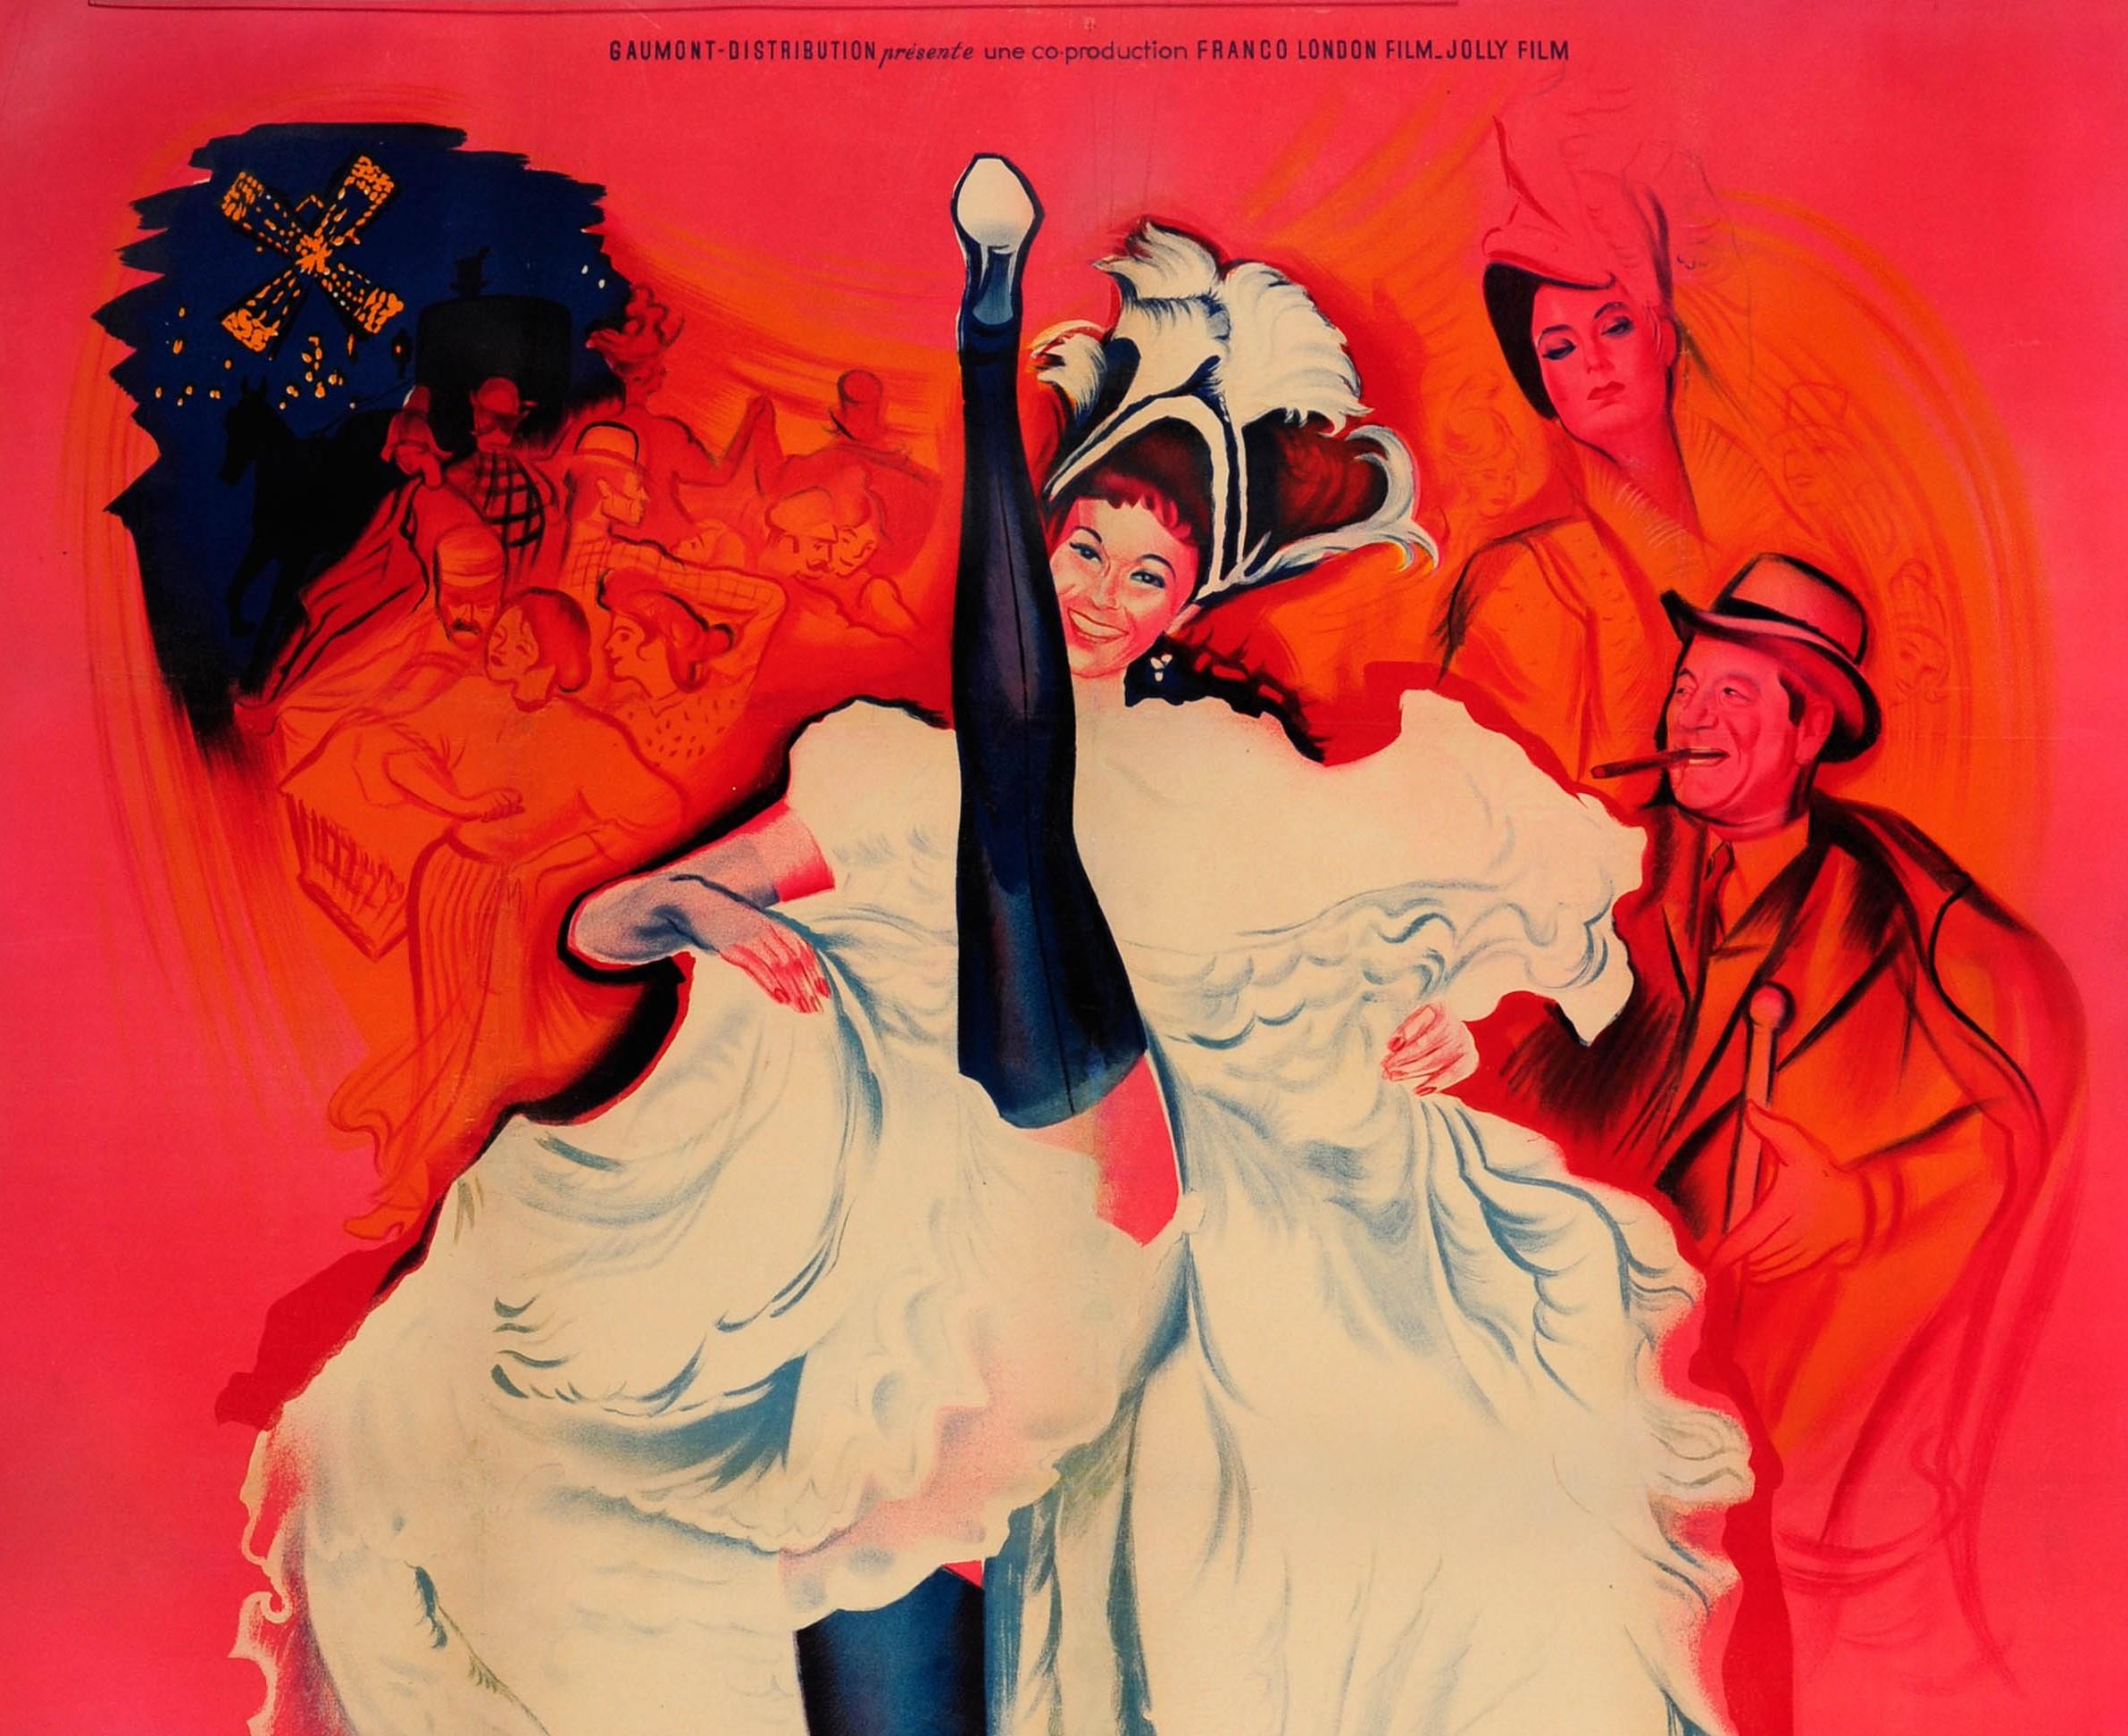 Original vintage movie poster for a comedy musical drama film French Cancan written and directed by Jean Renoir and starring Jean Gabin and Francoise Arnoul set in 1890s Paris about a cafe owner, his belly dancer mistress and a laundress that he